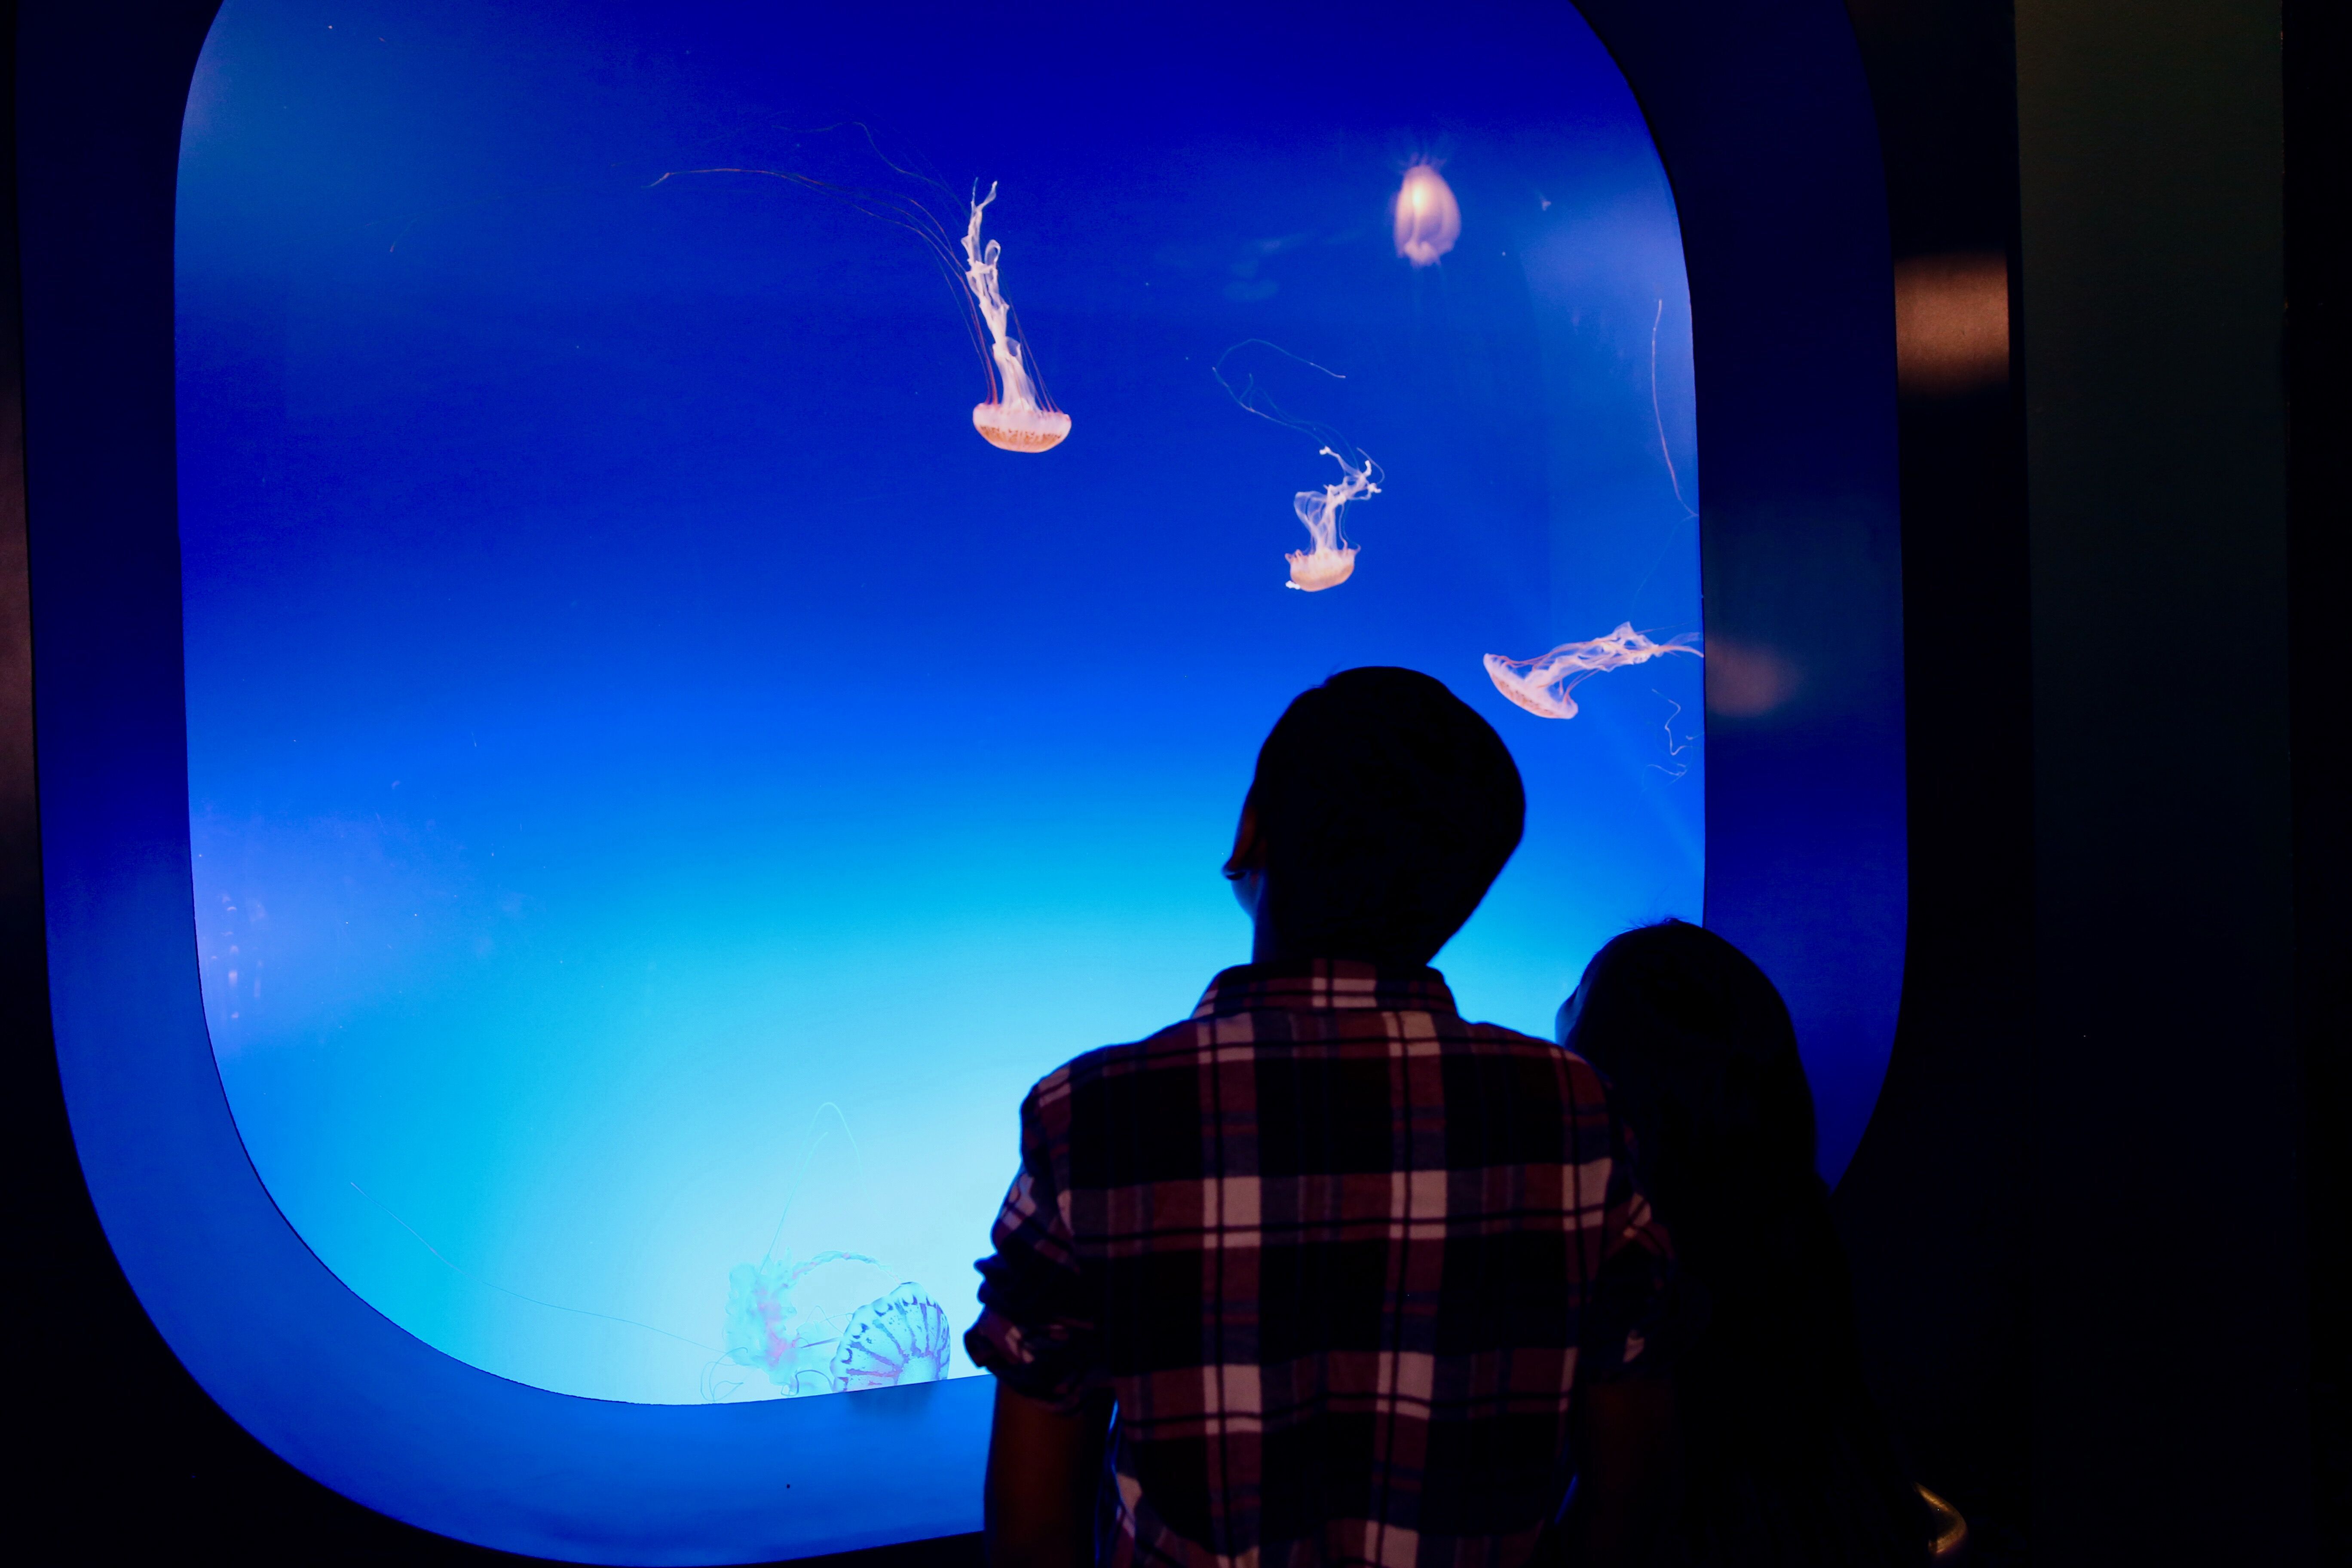 Children look at swimming jellies in blue tank